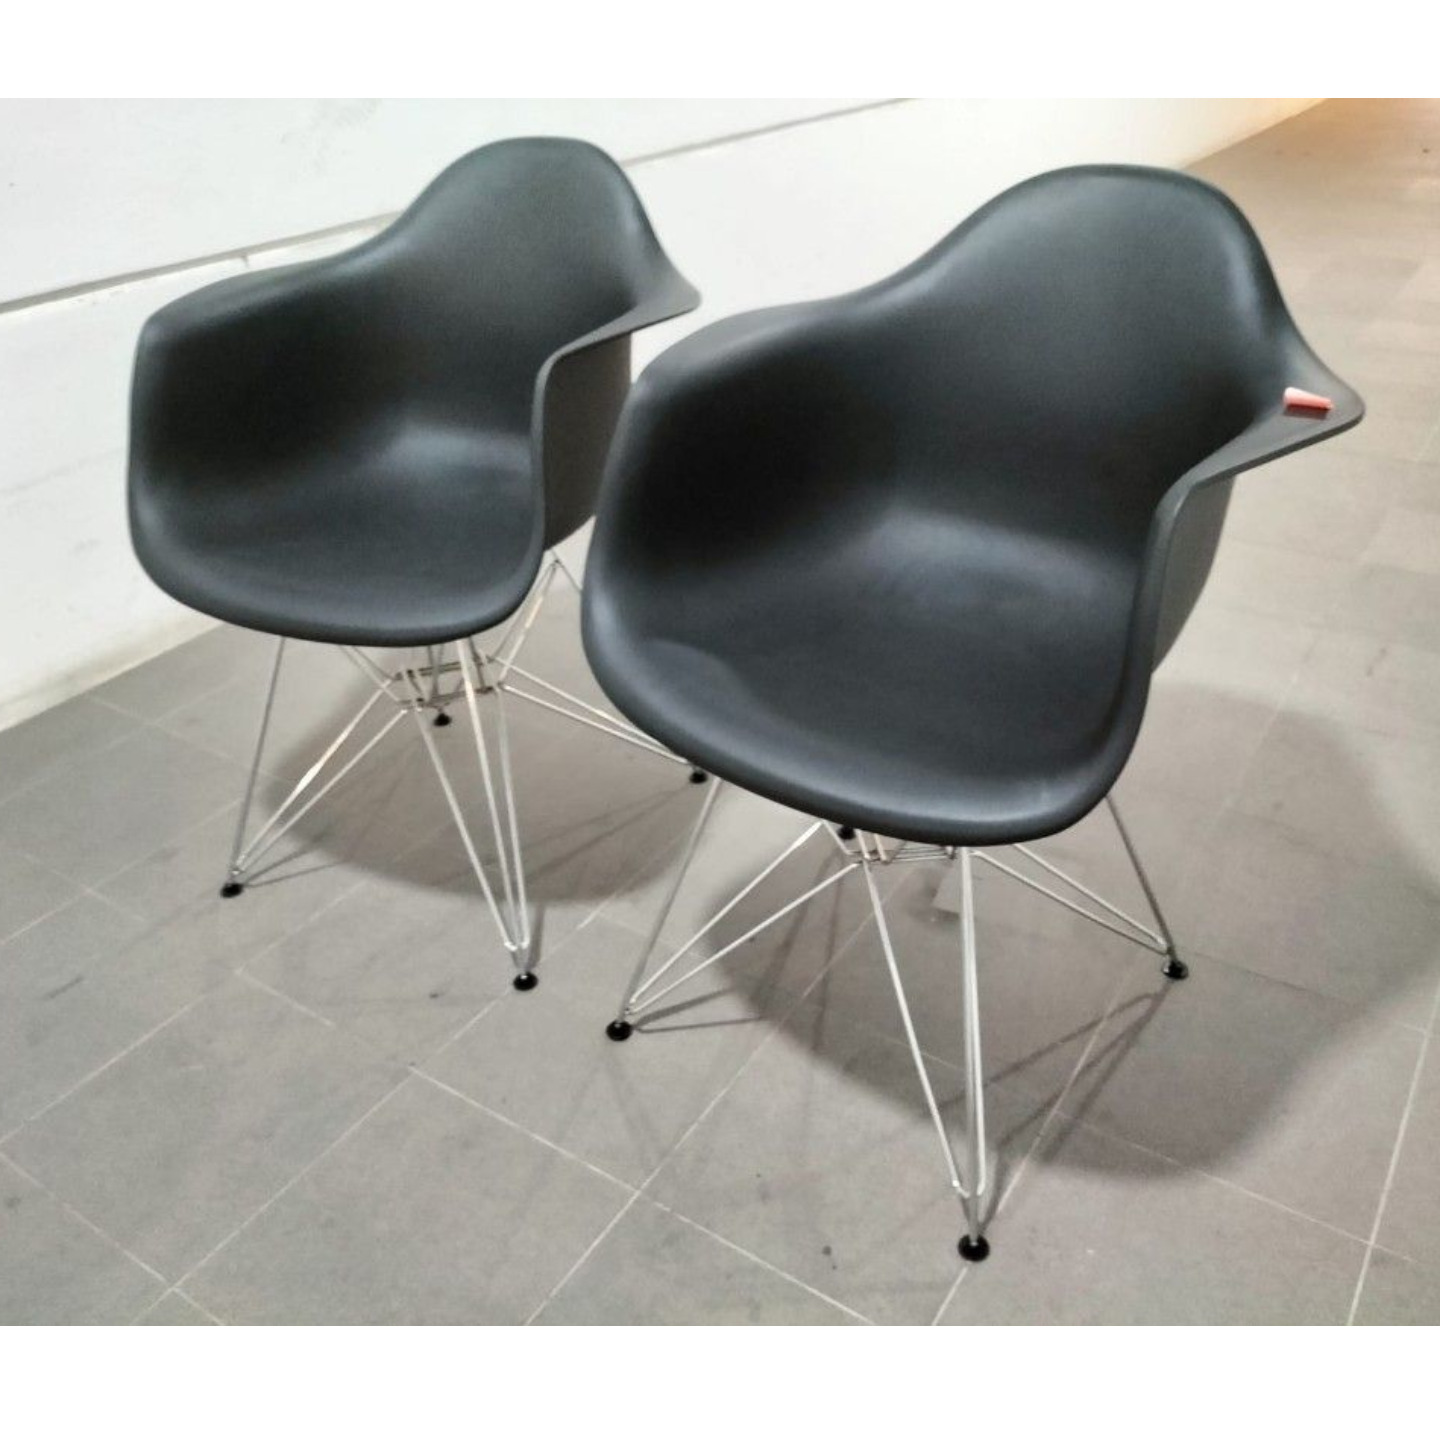 2PC RAYZ Eames Armchairs in BLACK with Metal Leg Frame